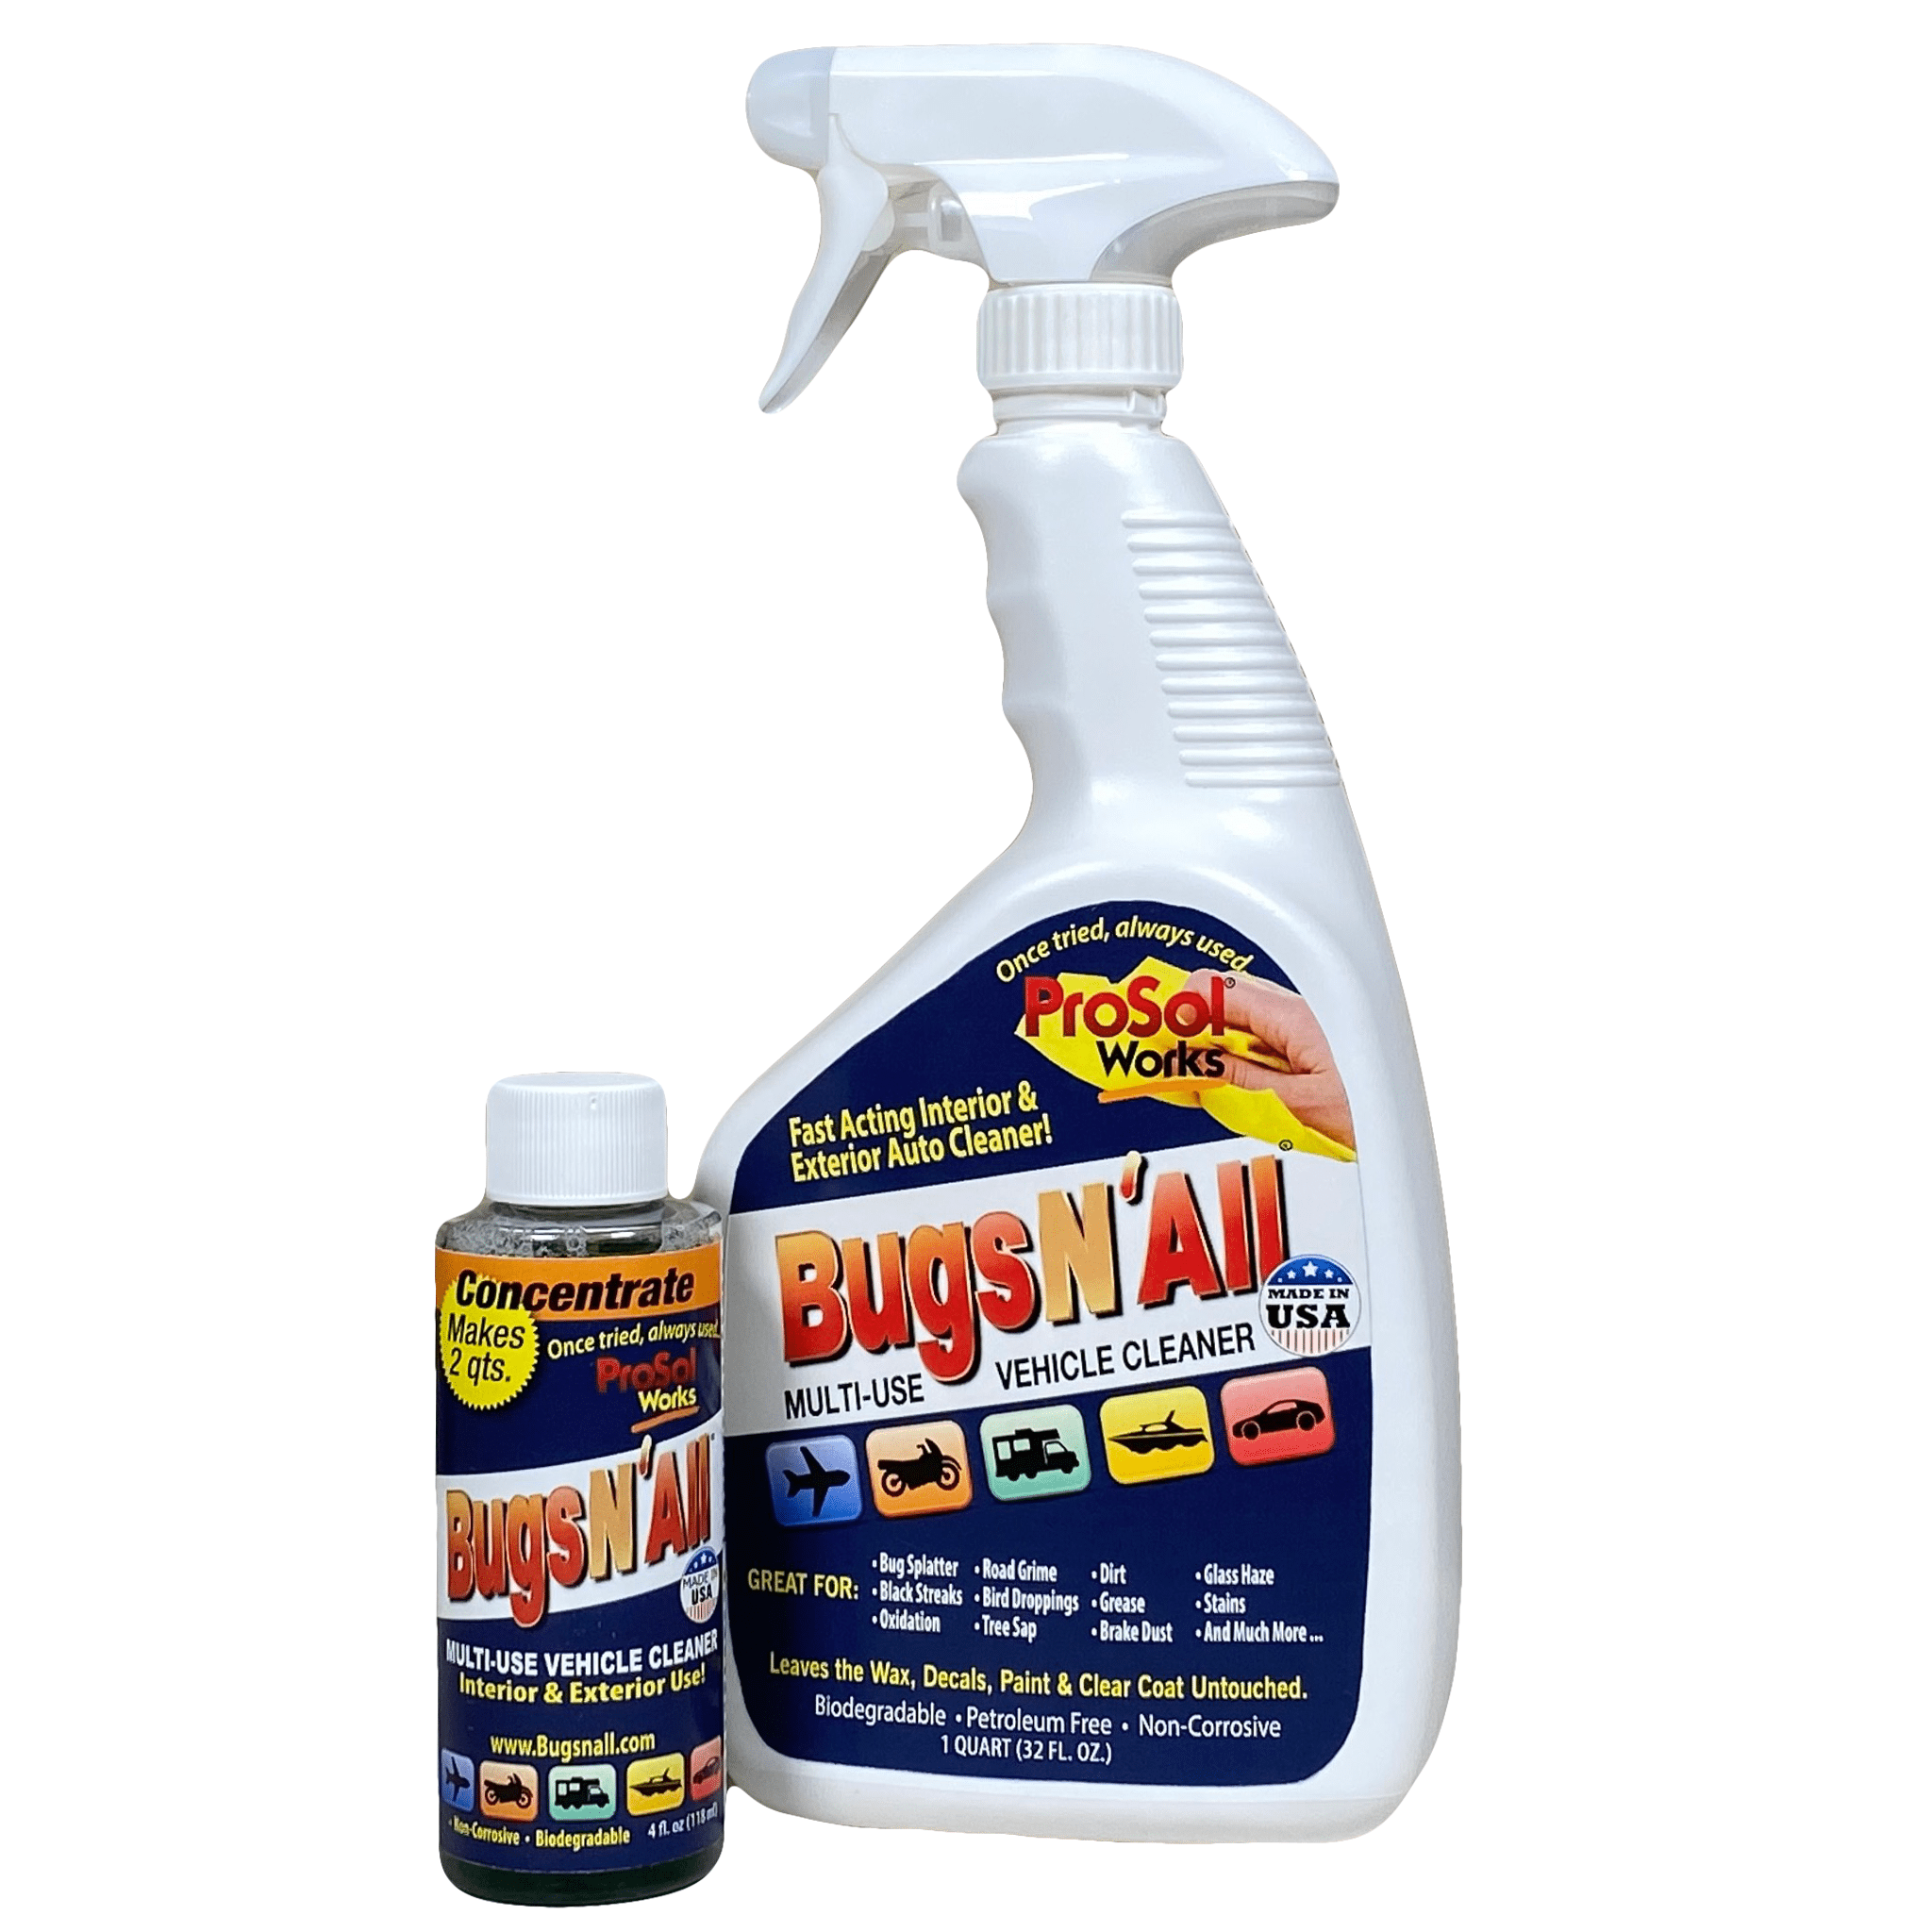 ProSol Works Bugs N All - Bug and Tar Remover Car Detailing Product, 4 oz 